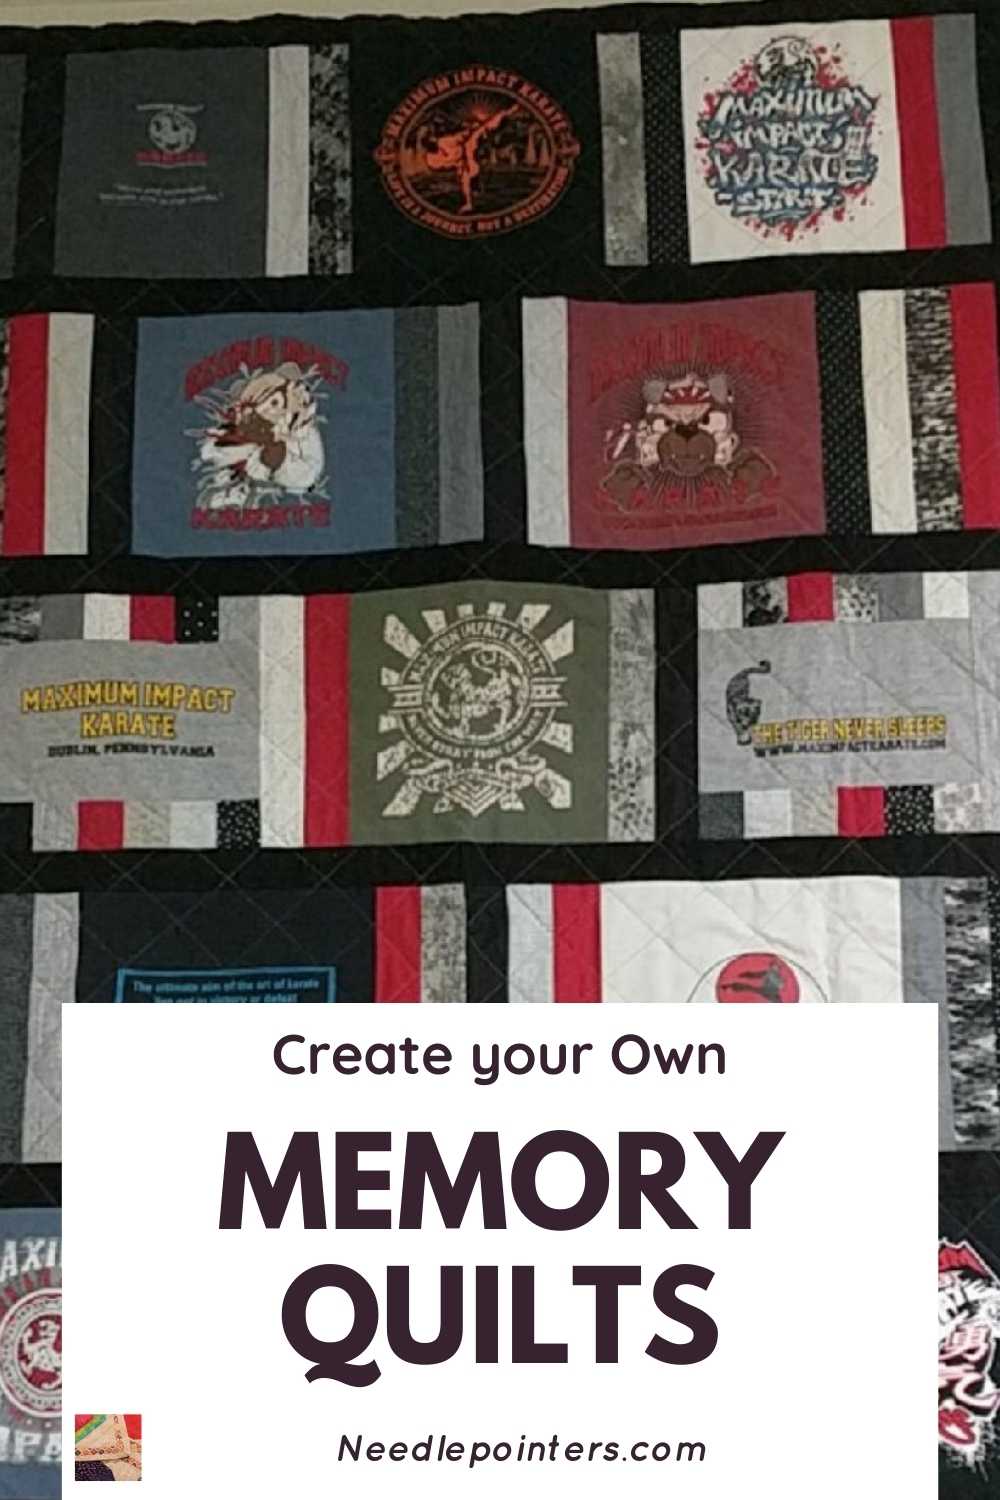 Memory Quilts: Wrap Up In A Warm Blanket of Memories | Needlepointers.com